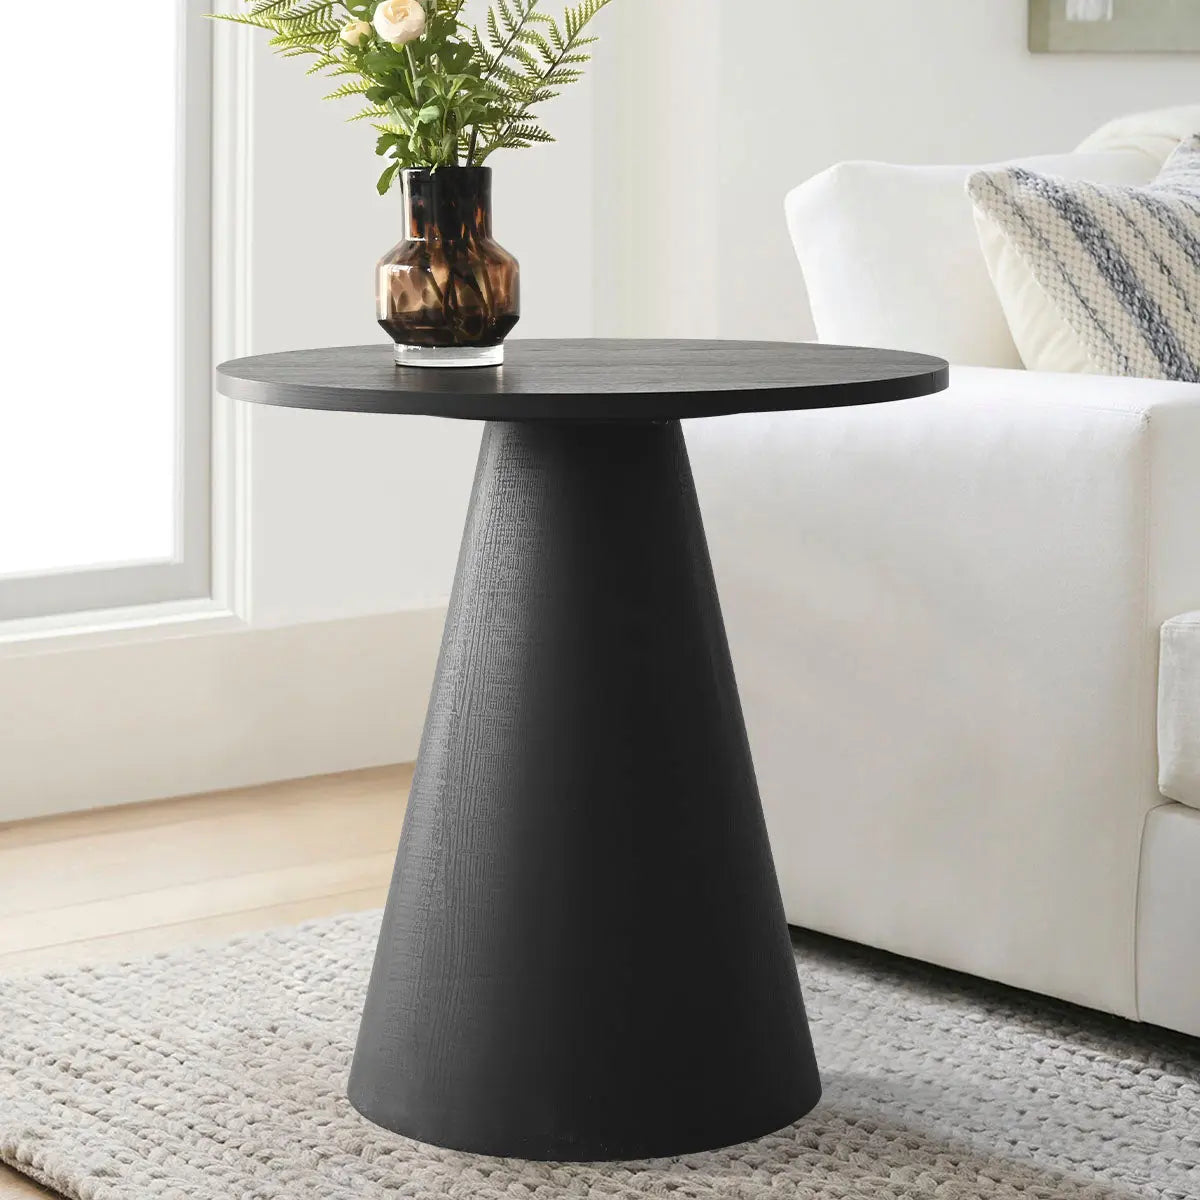 Dwen 24” Wooden Round Side Table The Pop Maison